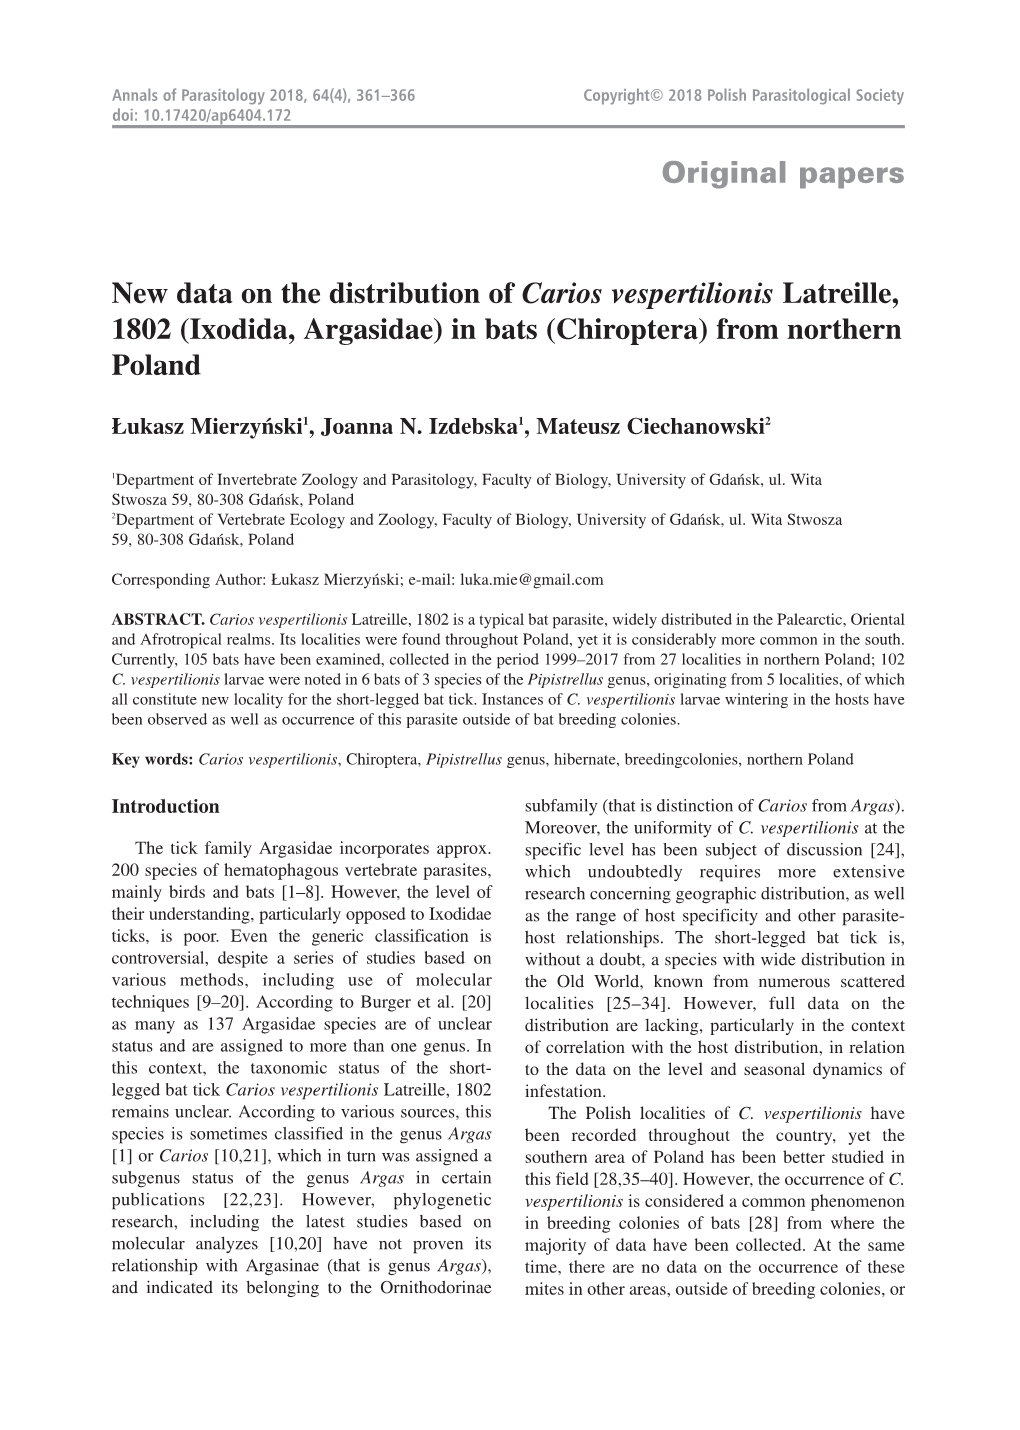 Original Papers New Data on the Distribution of Carios Vespertilionis Latreille, 1802 (Ixodida, Argasidae) in Bats (Chiroptera)